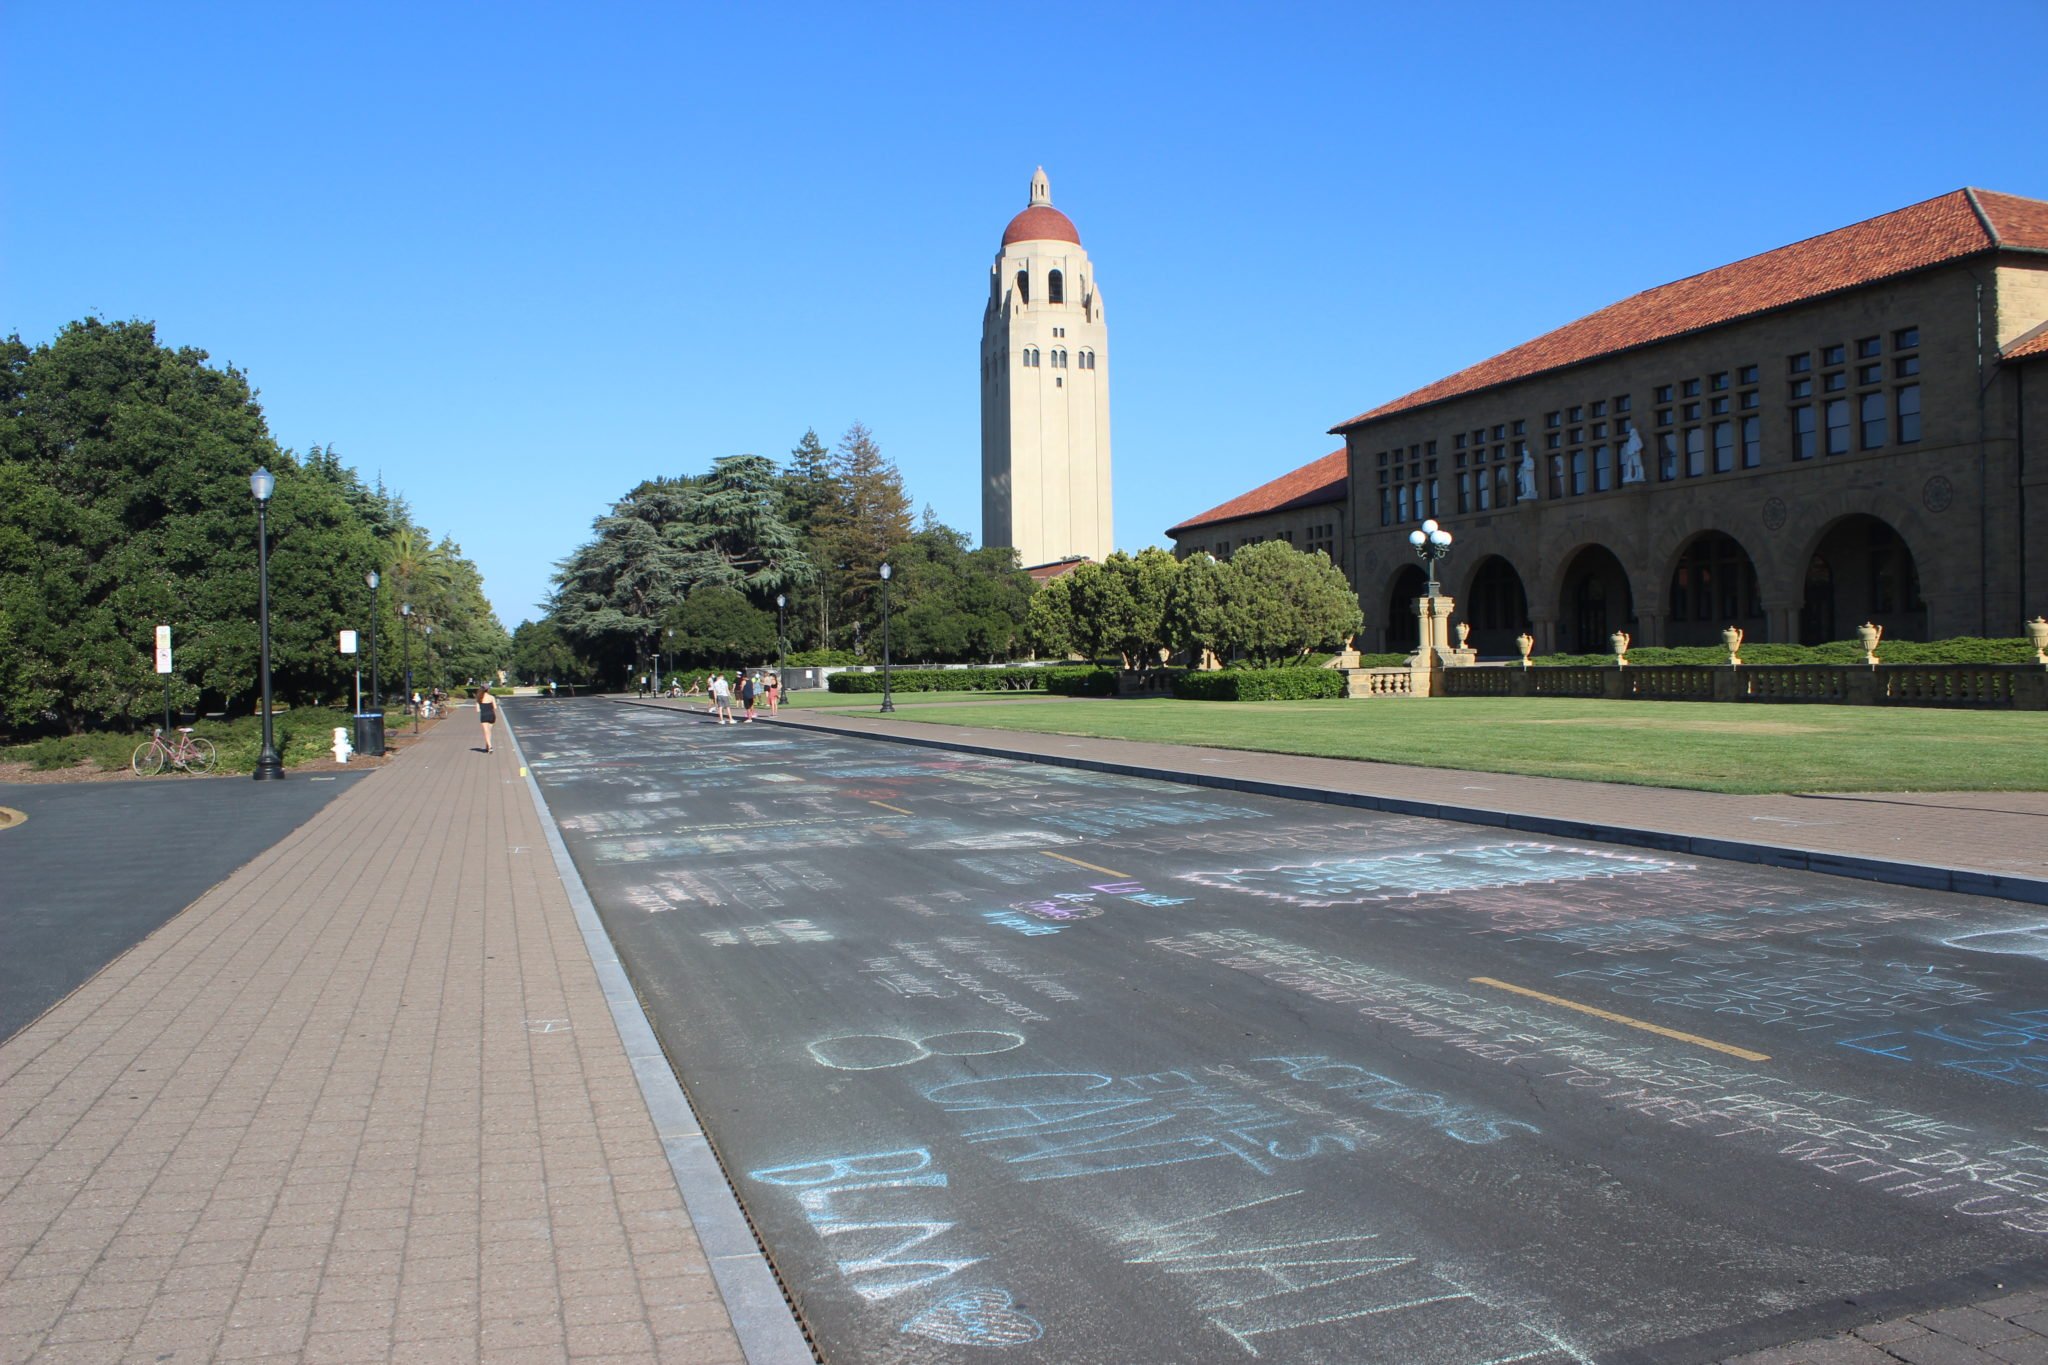 View of chalk along Jane Stanford Way, with the front of Main Quad on the right and Hoover Tower in the background